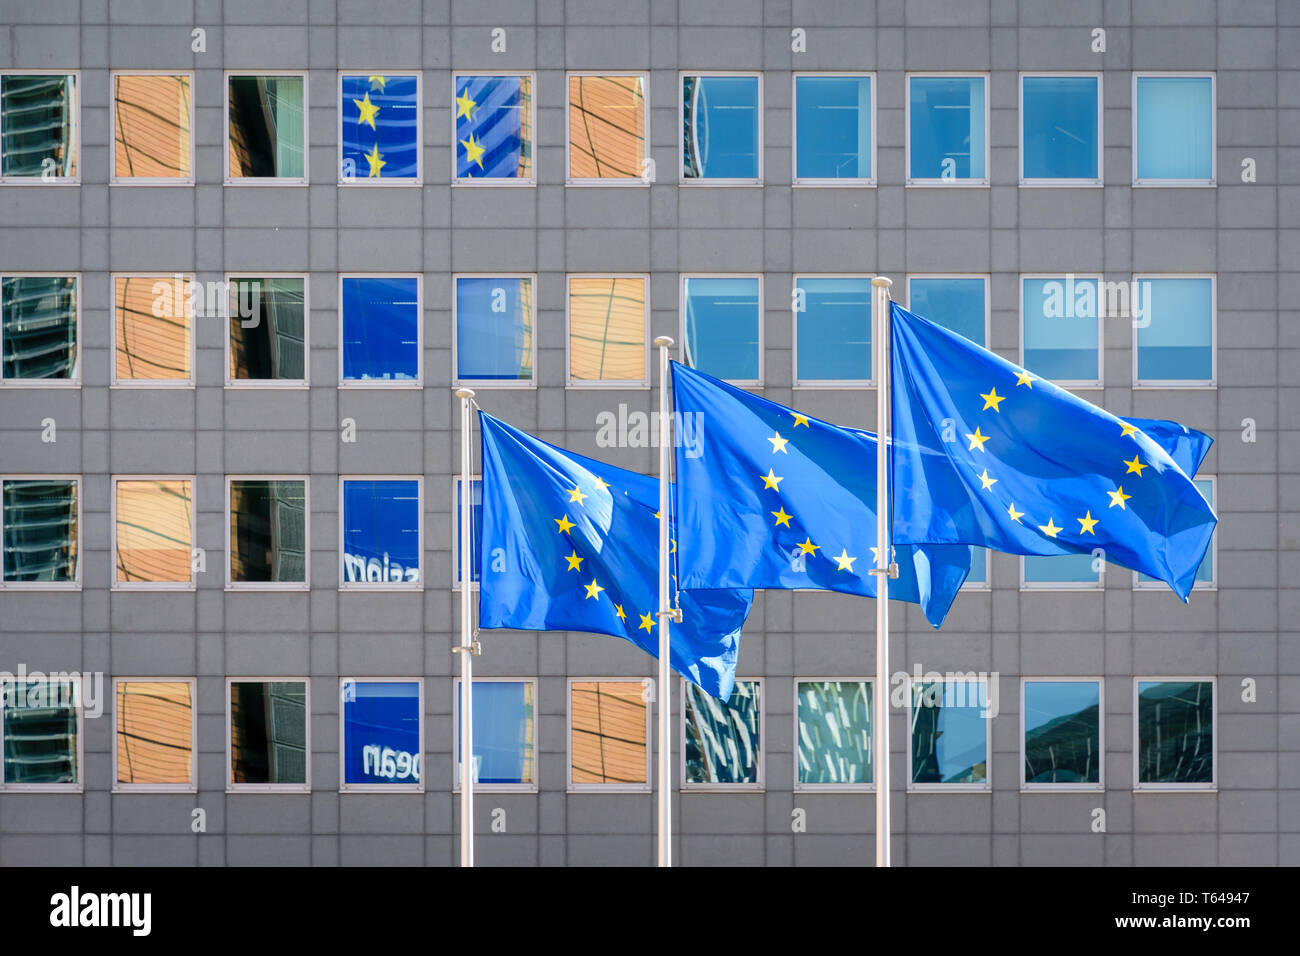 Three flags of the European Union blowing in the wind in front of the Berlaymont building, seat of the European Commission in Brussels, Belgium. Stock Photo